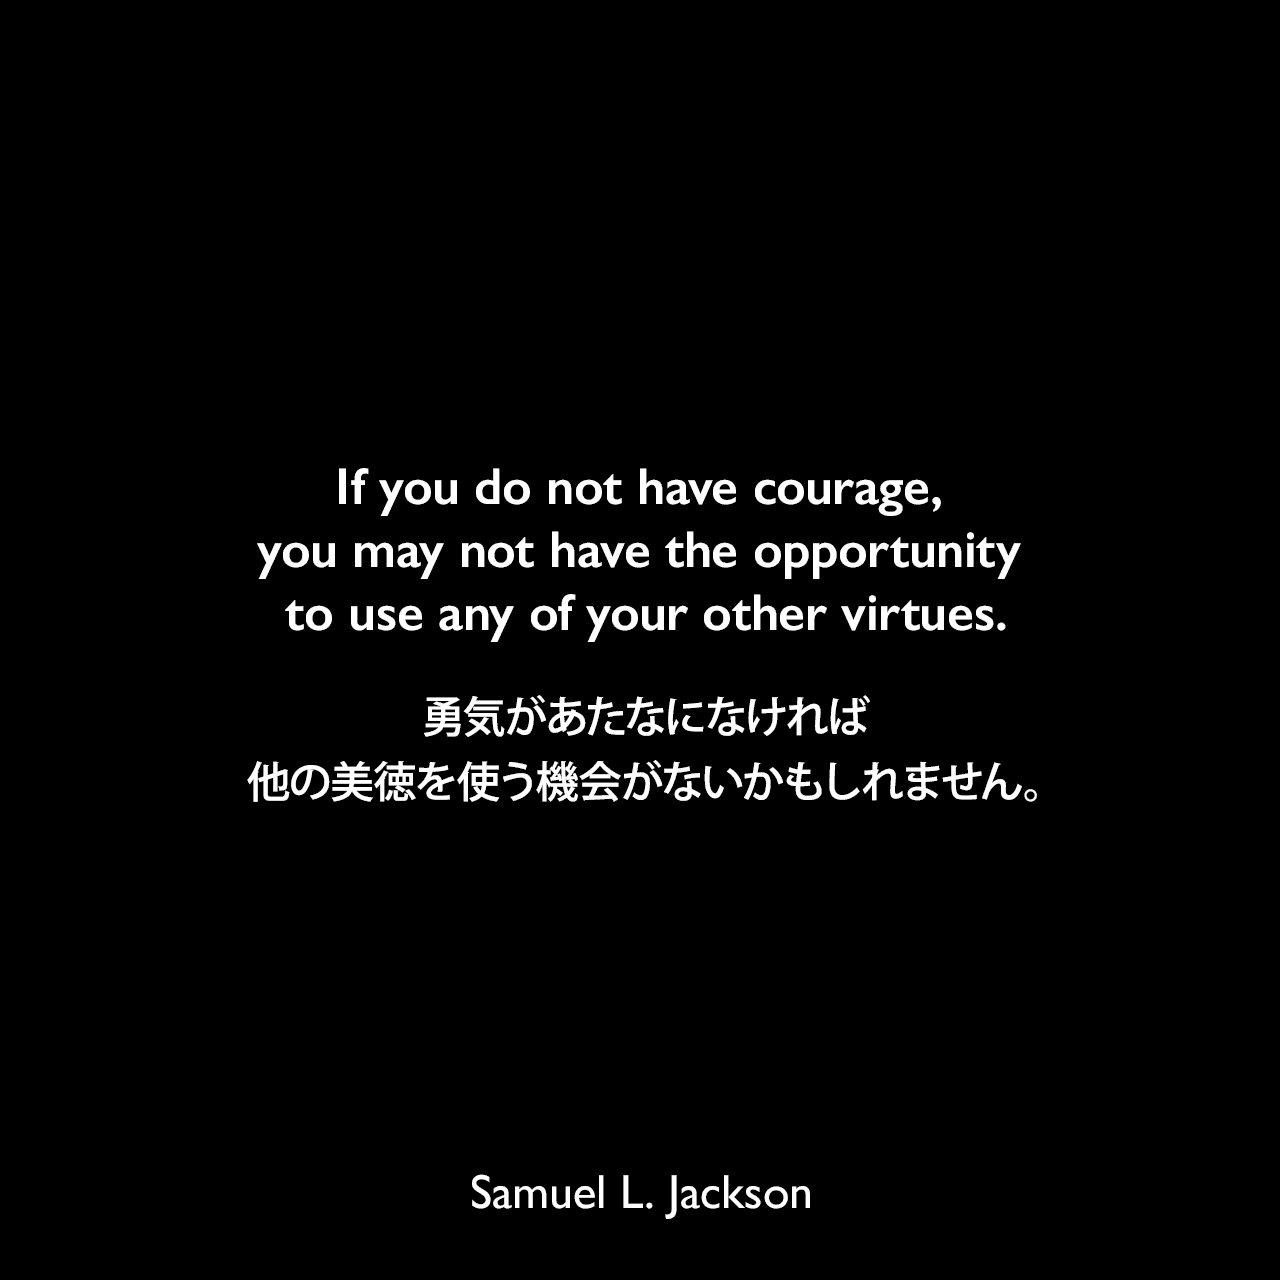 If you do not have courage, you may not have the opportunity to use any of your other virtues.勇気があたなになければ、他の美徳を使う機会がないかもしれません。Samuel Leroy Jackson